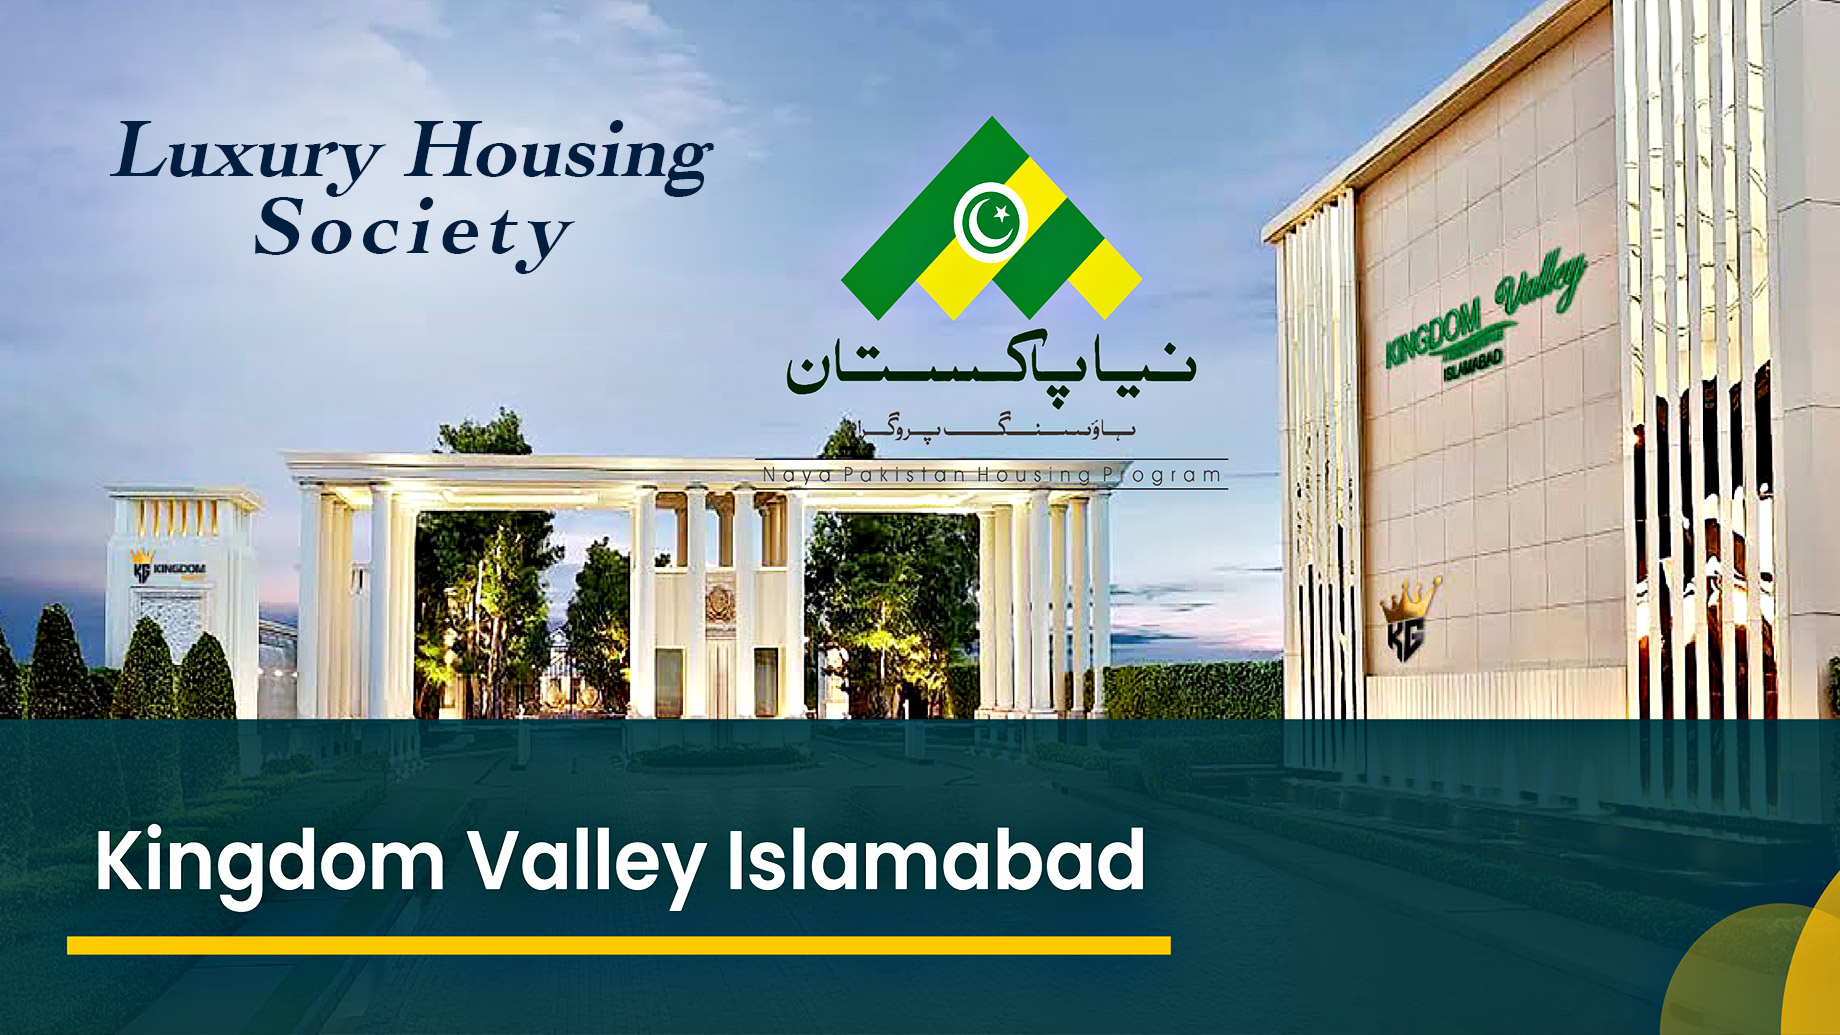 Affordable Housing in Islamabad: An Overview of Kingdom Valley Islamabad